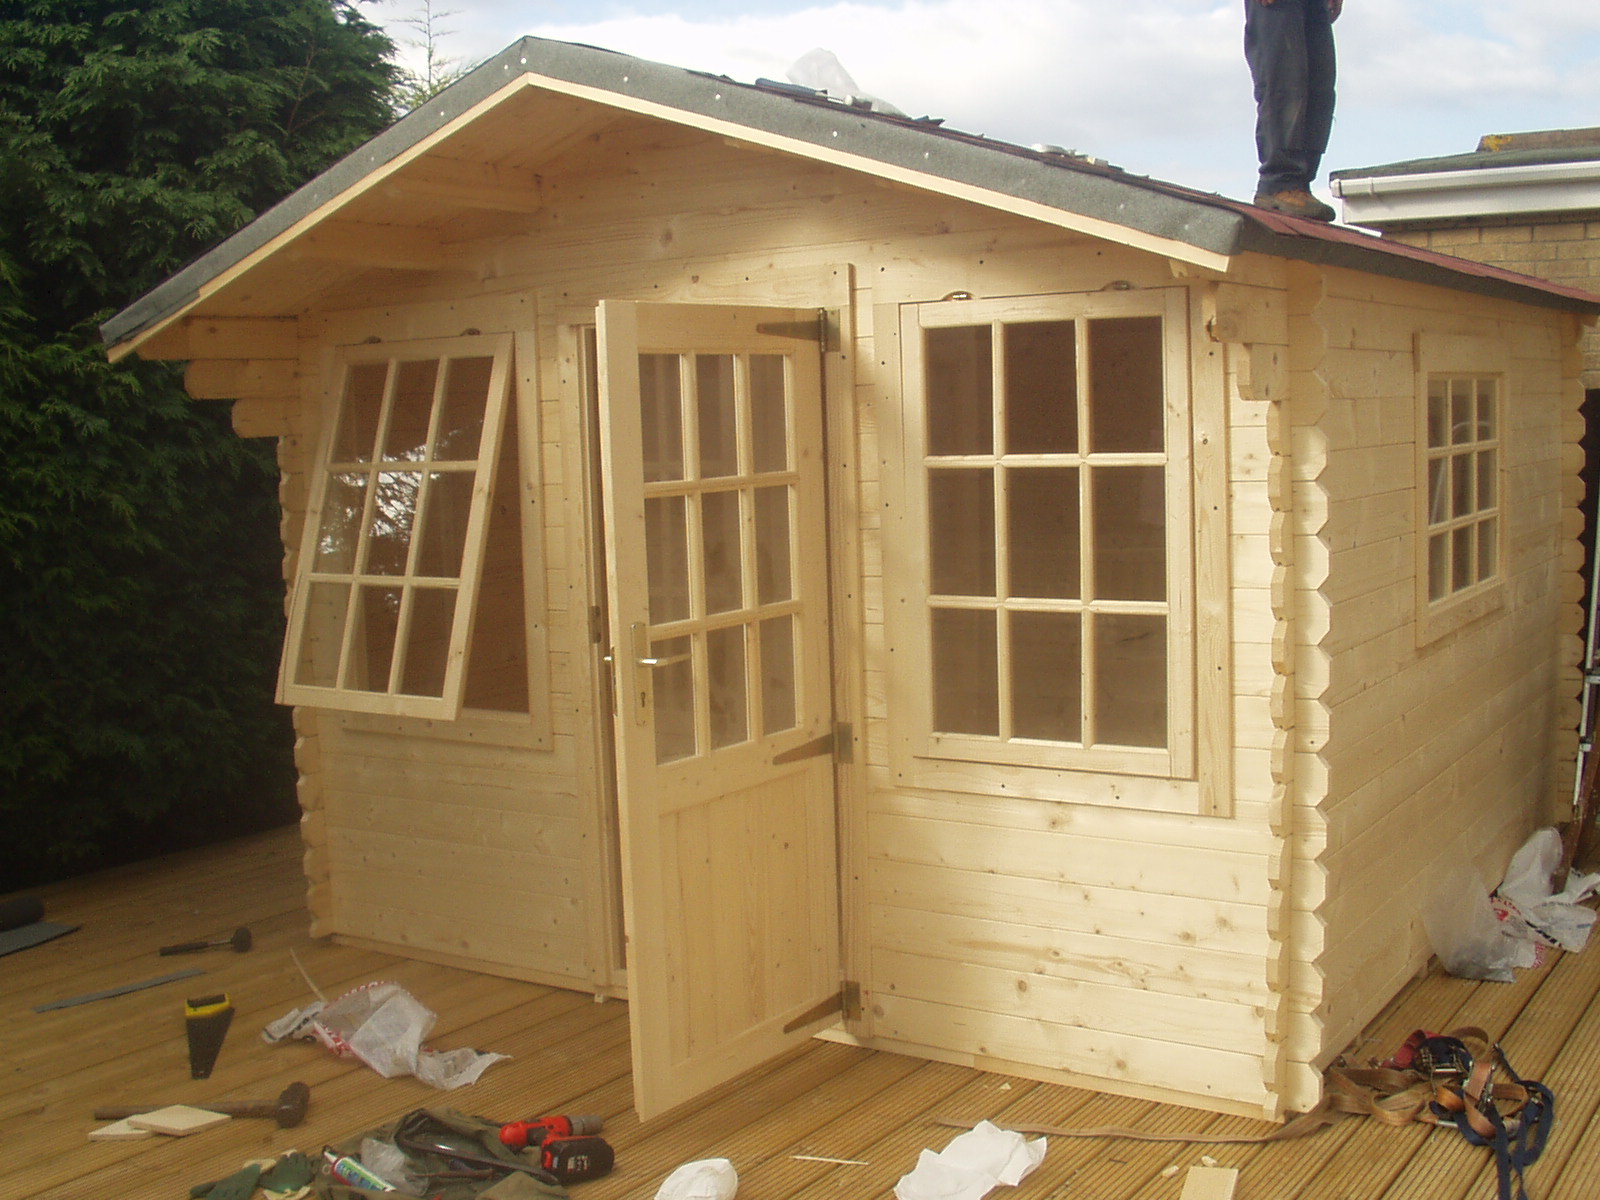 ... skipping any parts or trying to rush things in building DIY sheds